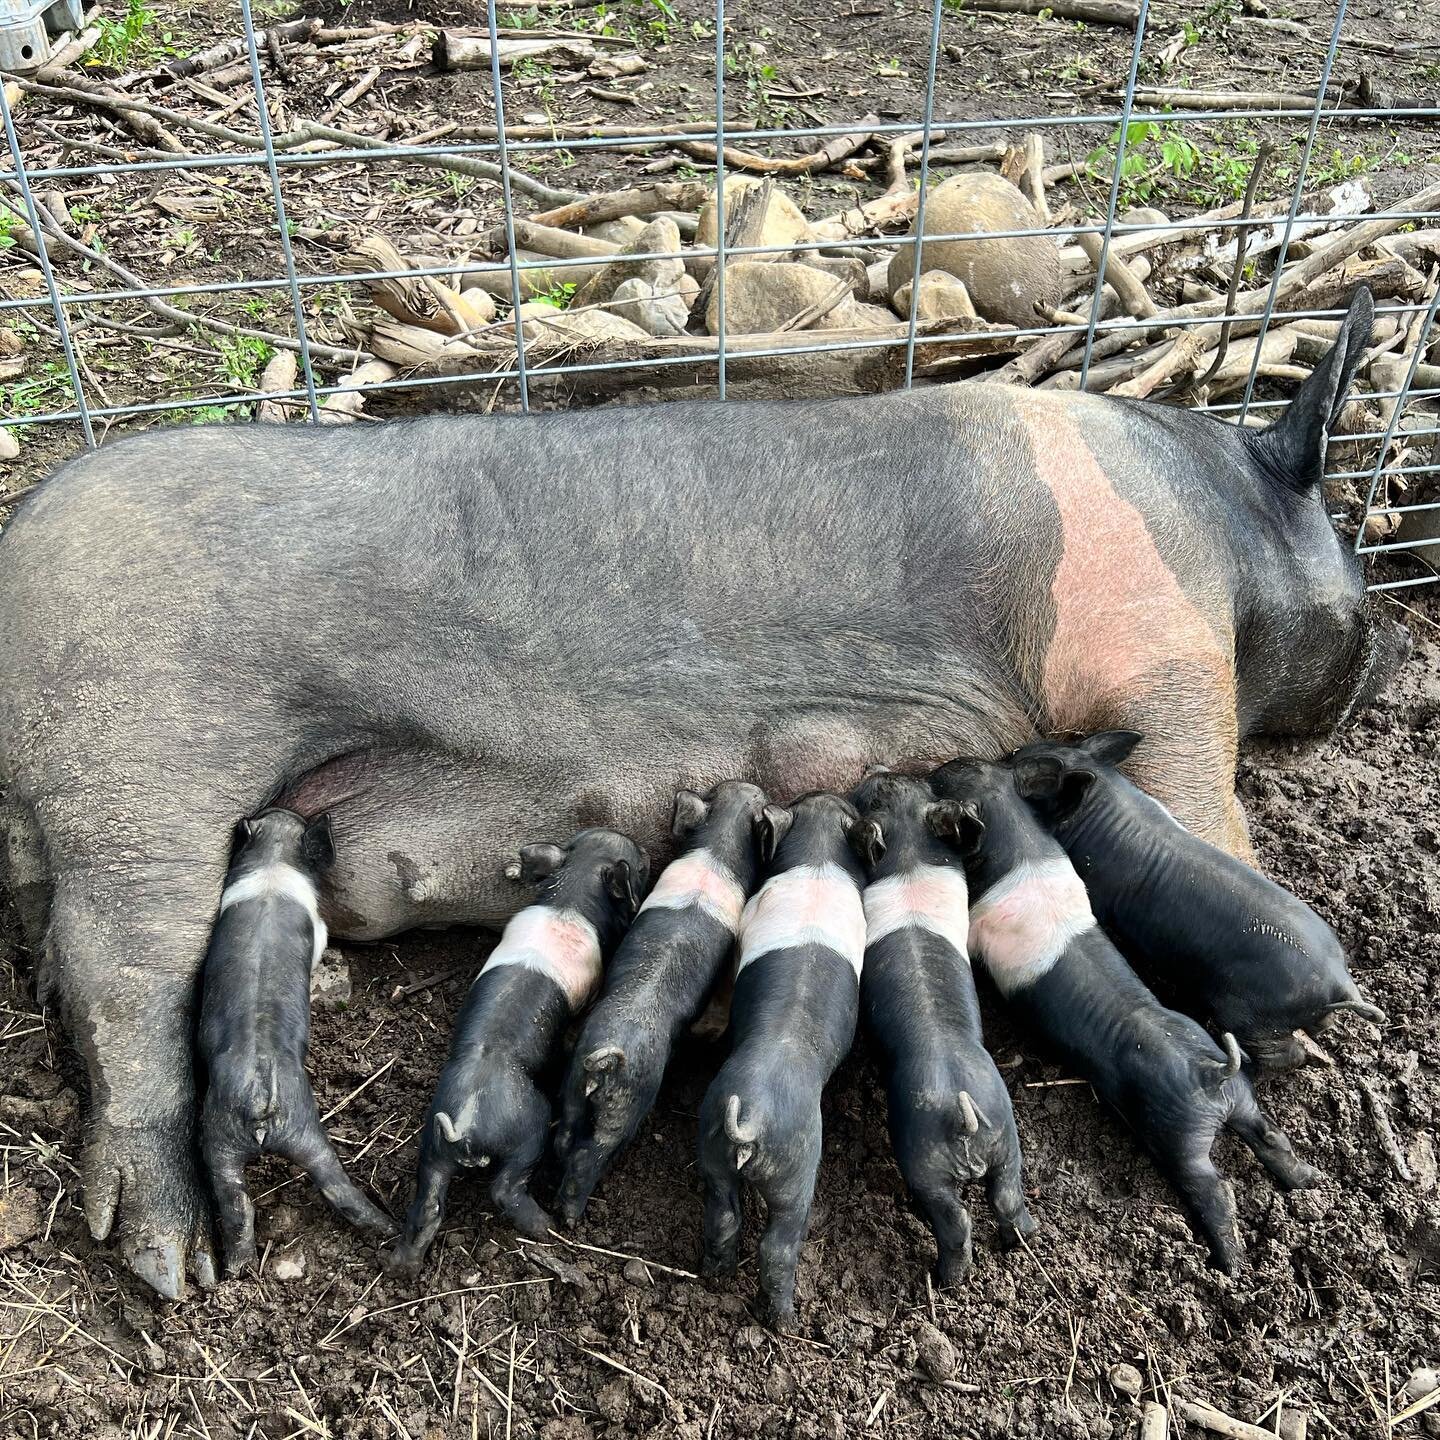 Mom and all seven piglets doing great! Week one! #pig #pigs #pigsofinstagram #piglets #farm